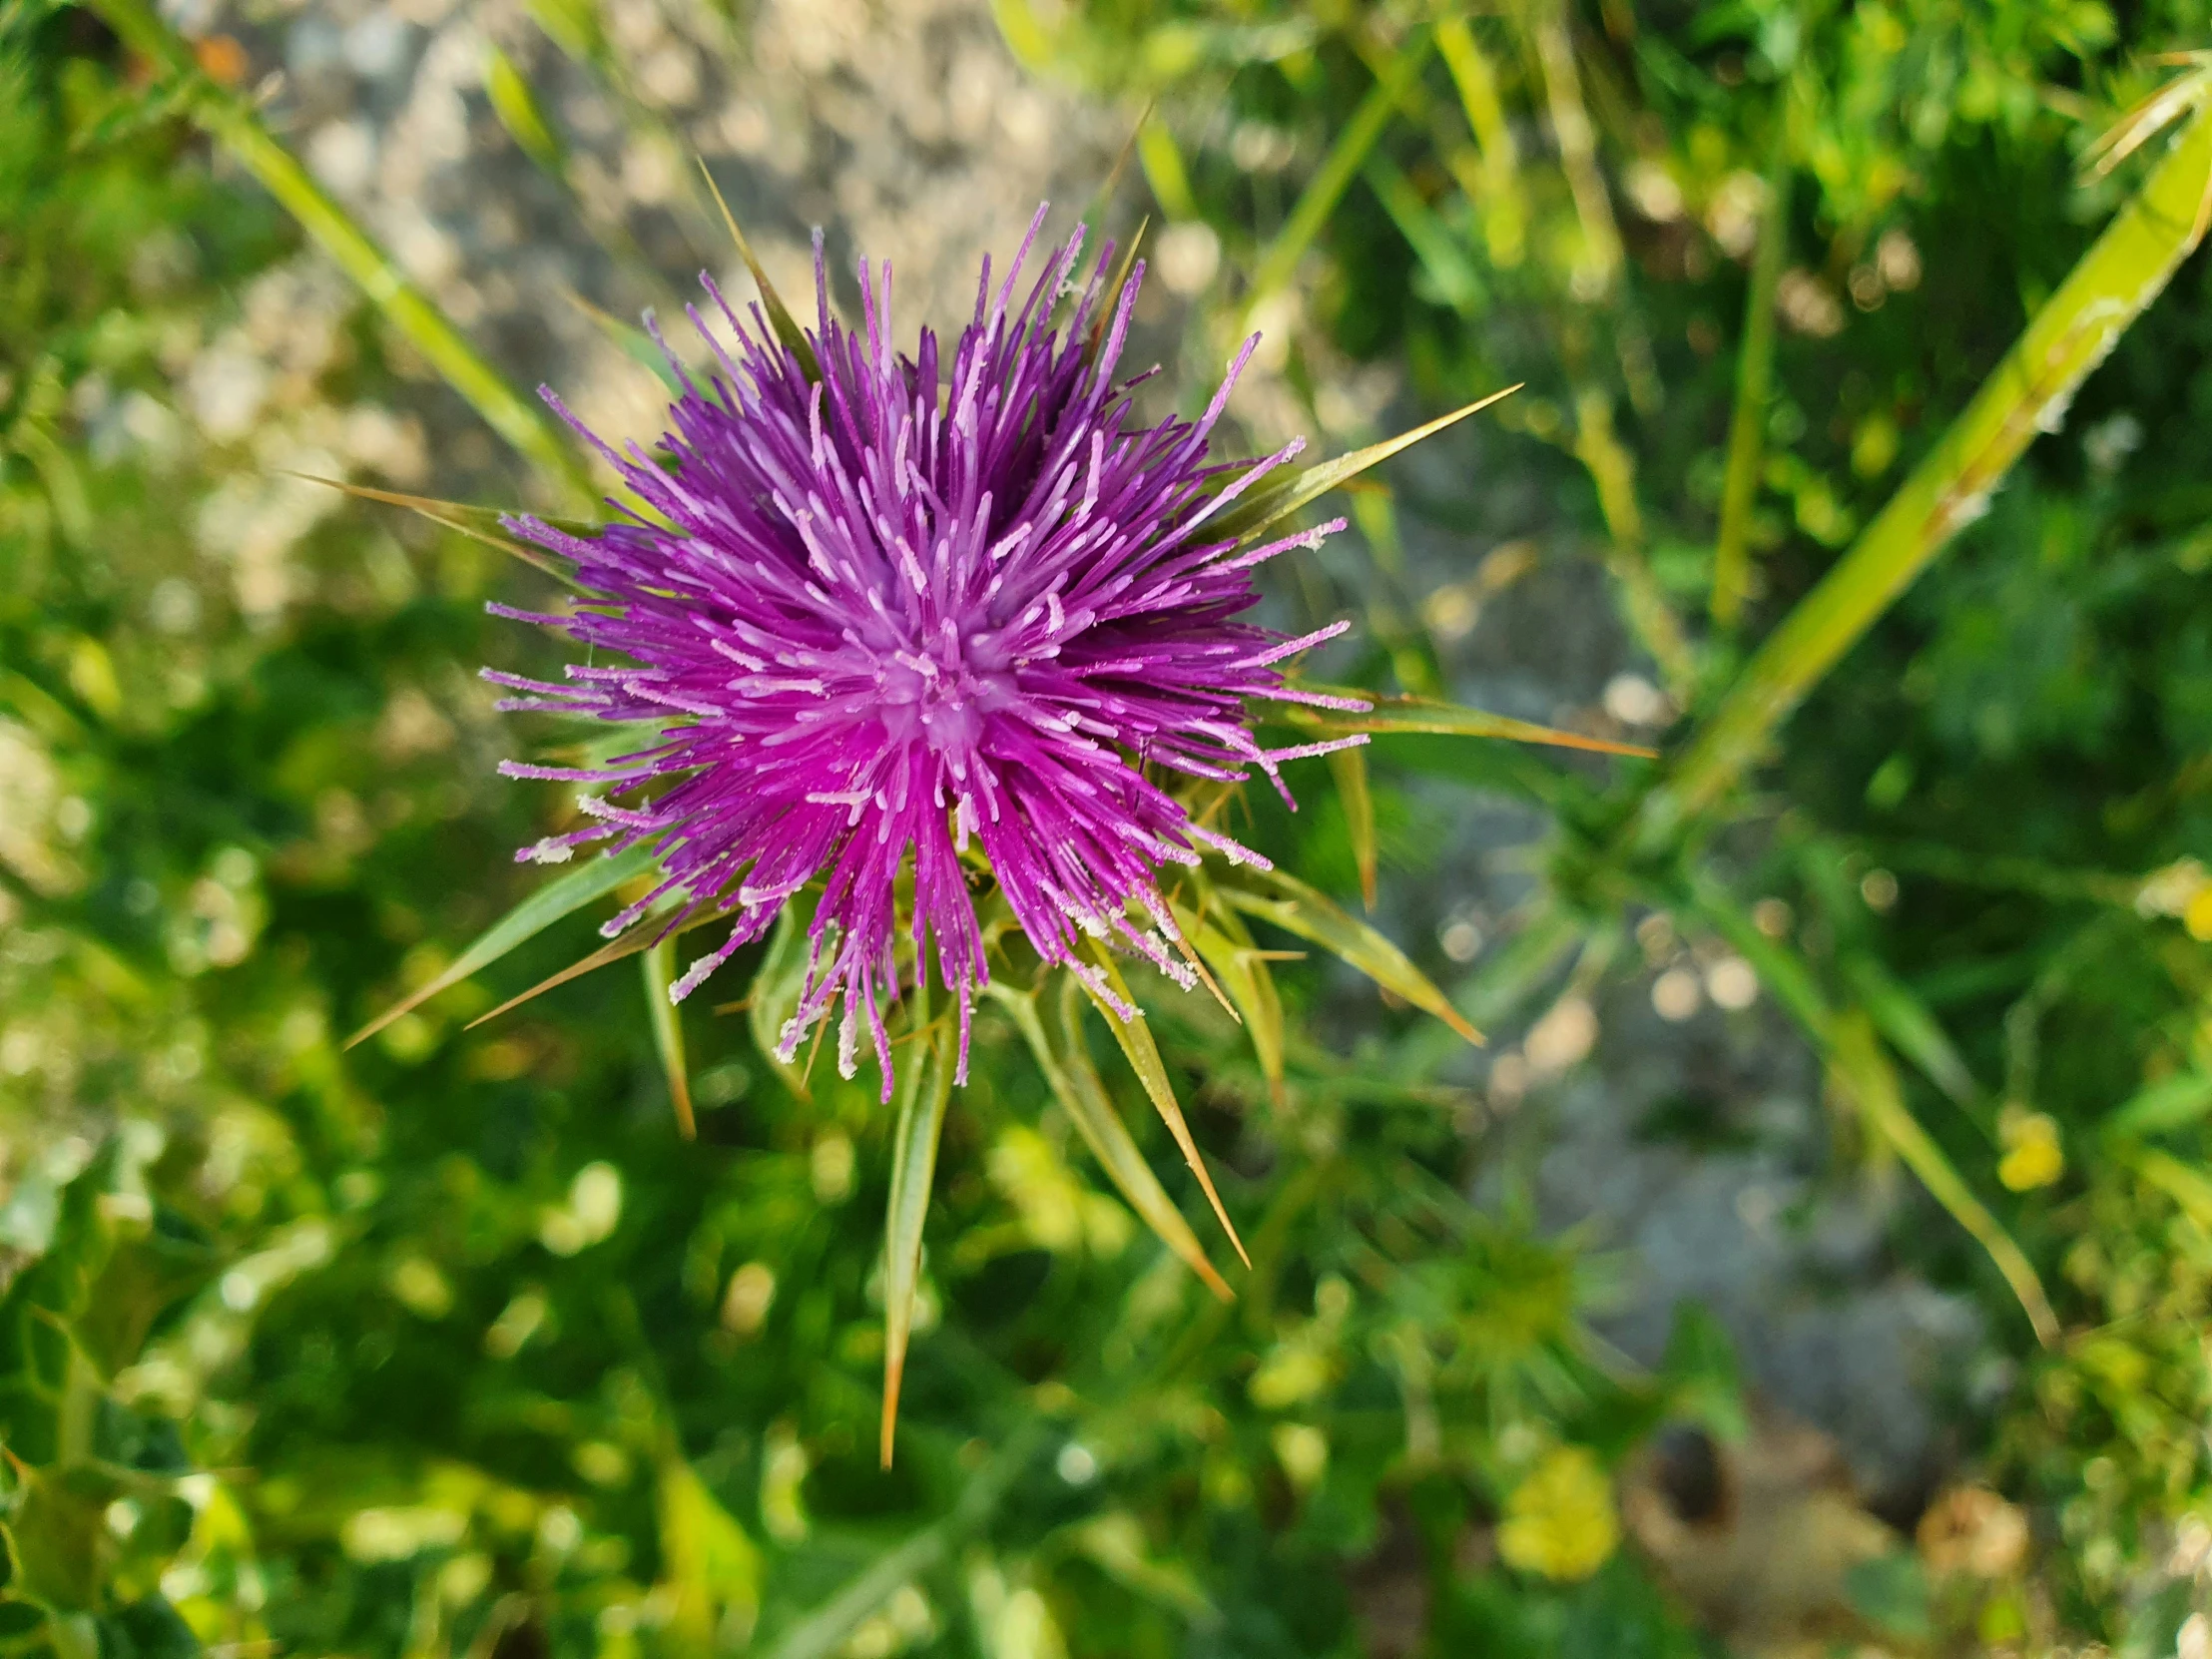 a purple flower in the middle of a grass area